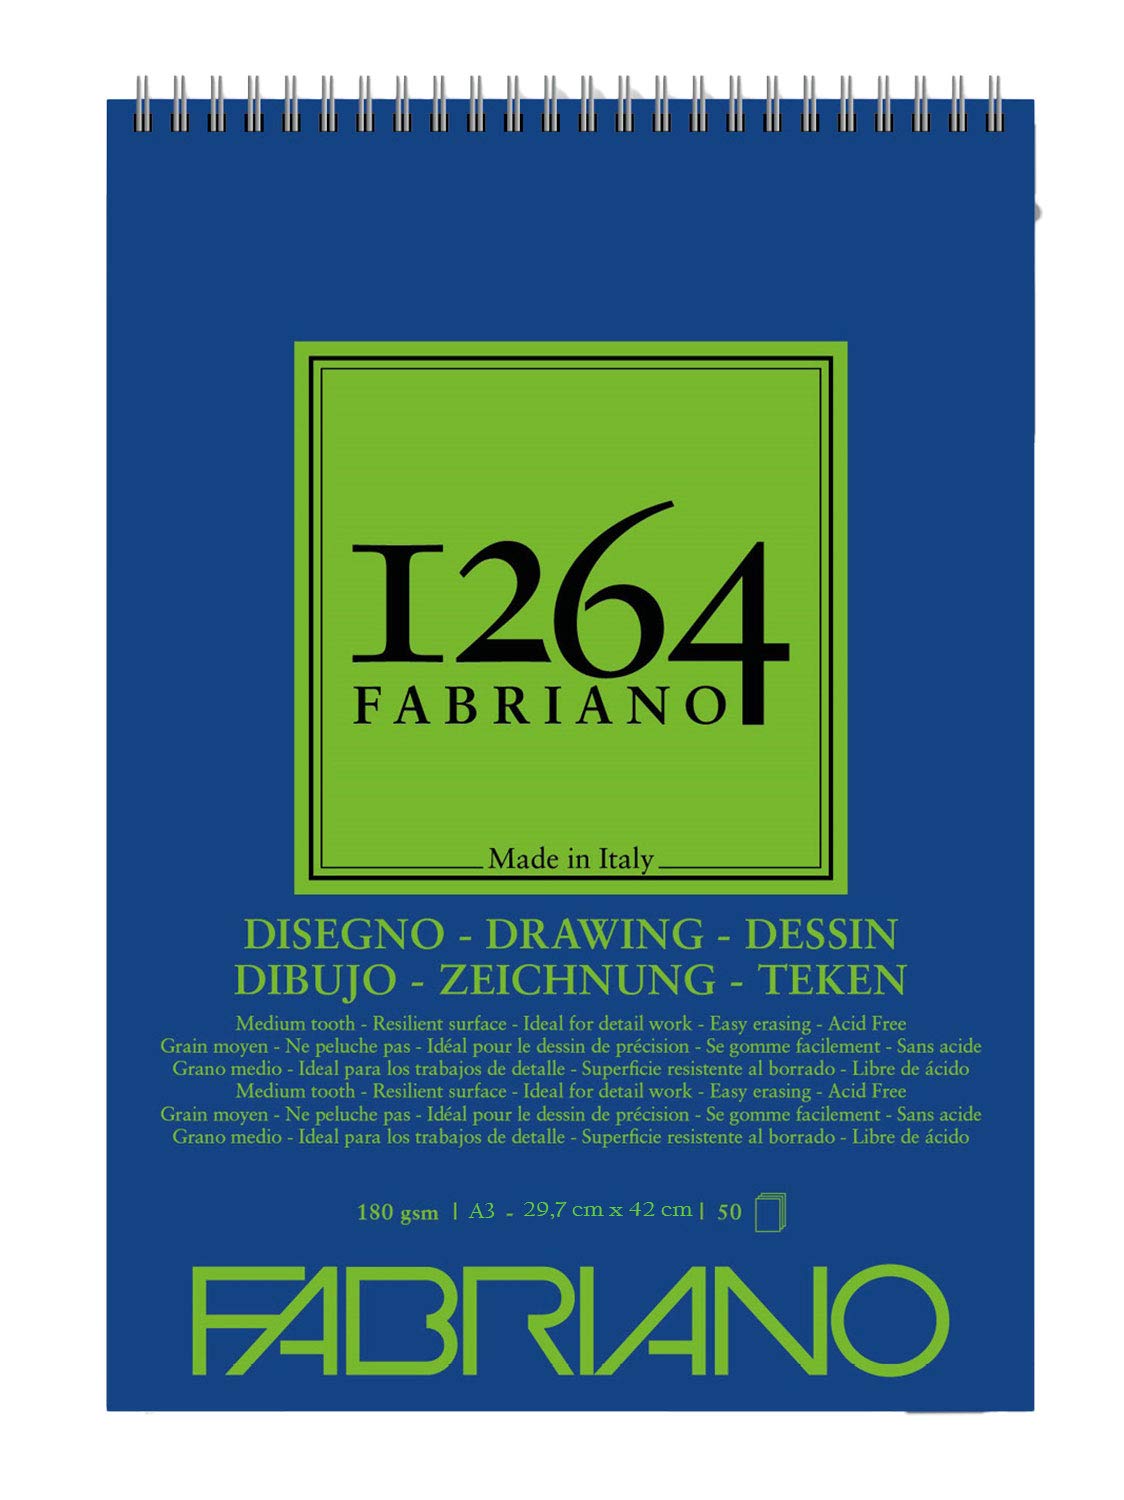 Drawing 1264 Fabriano